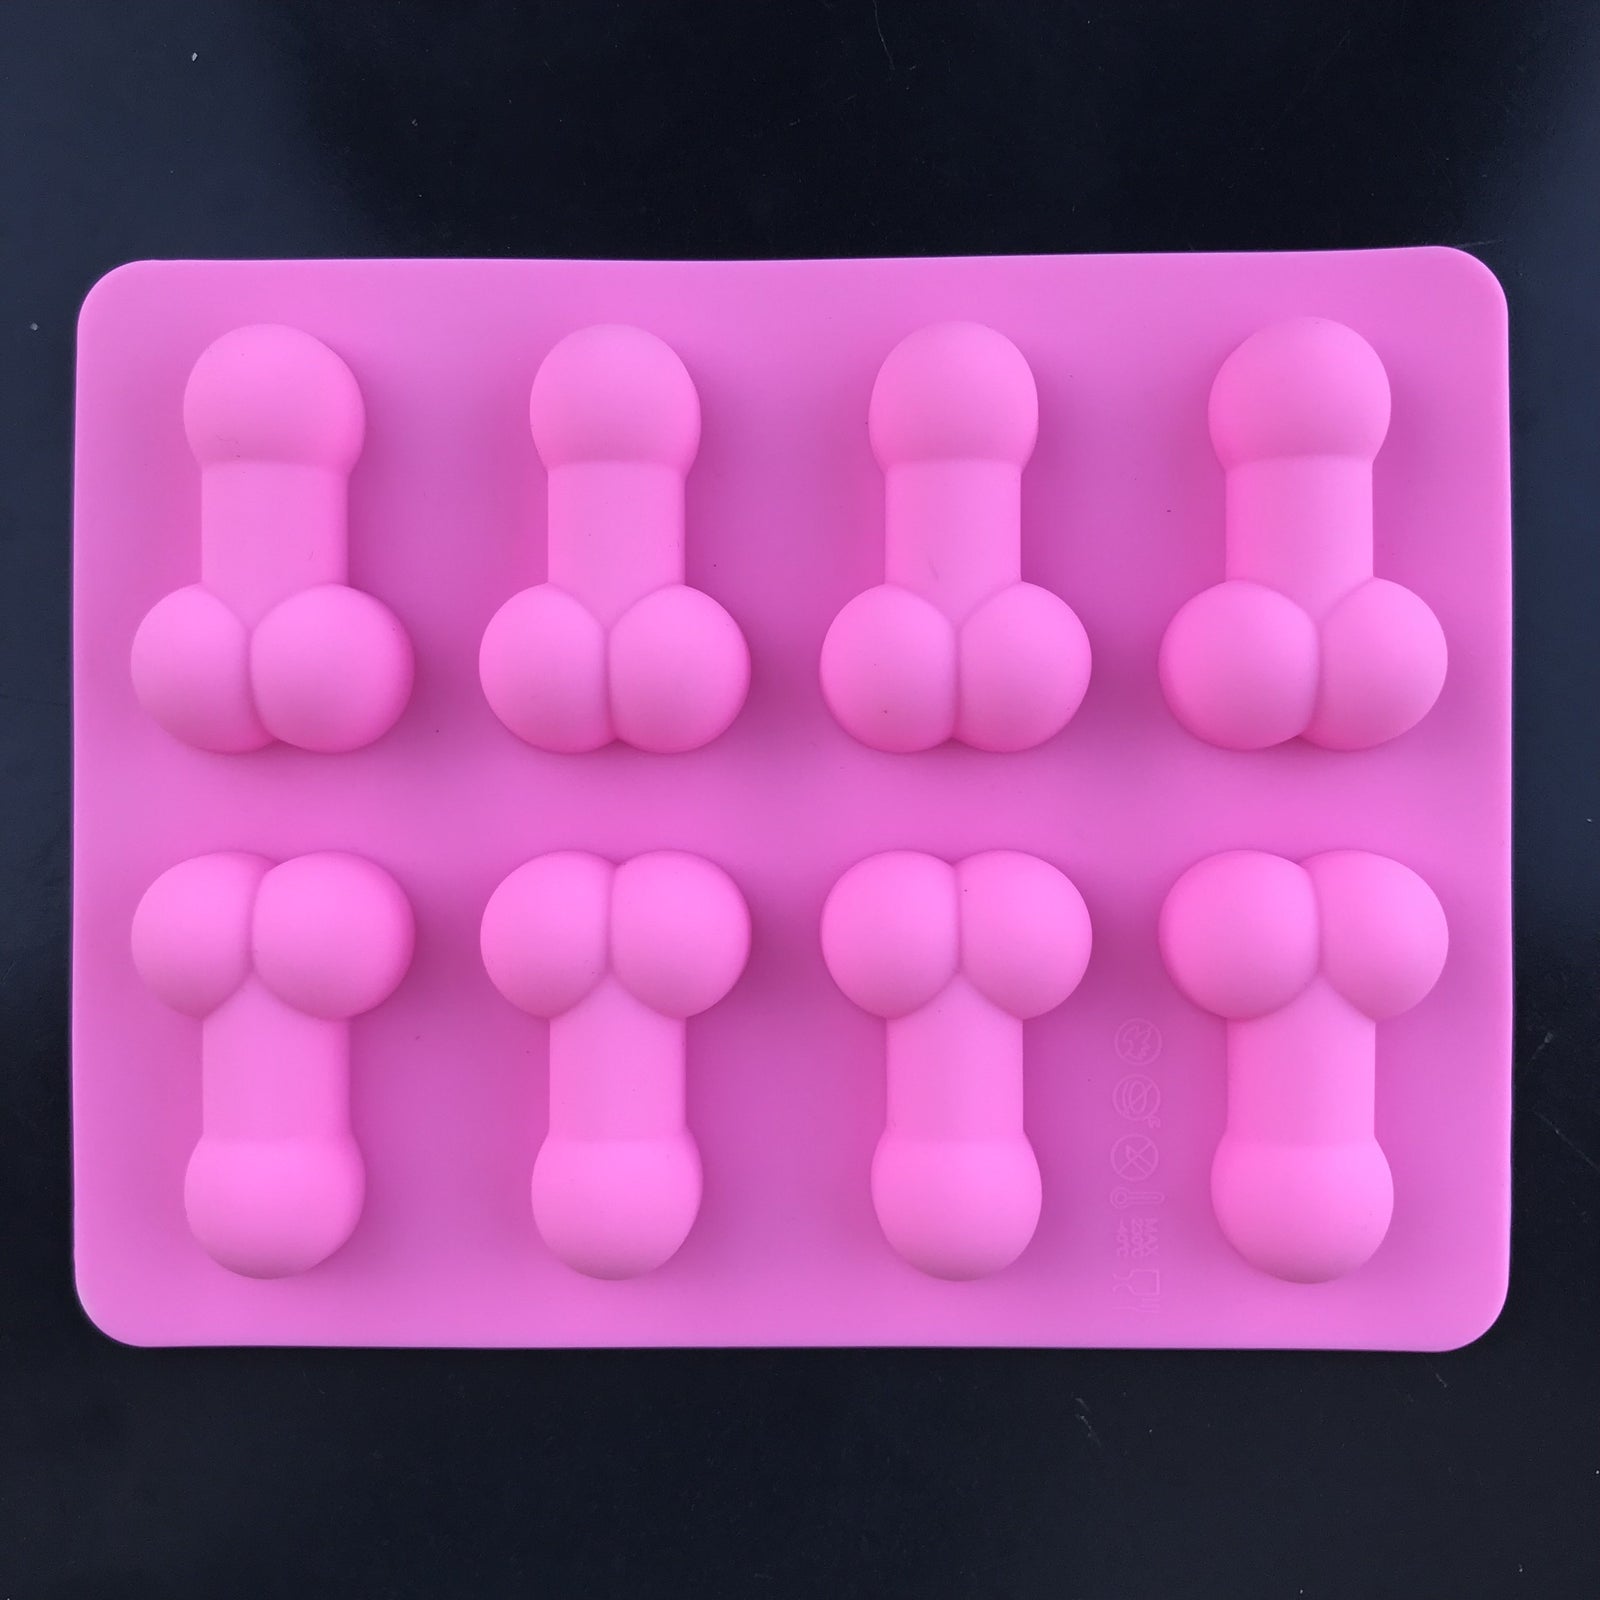 Boobie Ice Tray-2pk Bachelor Party Boobs Ice Mold-boob Ice Cubes-great for  Bachelor Stag Party or Any Adult Themed Party Funny Game Prize 